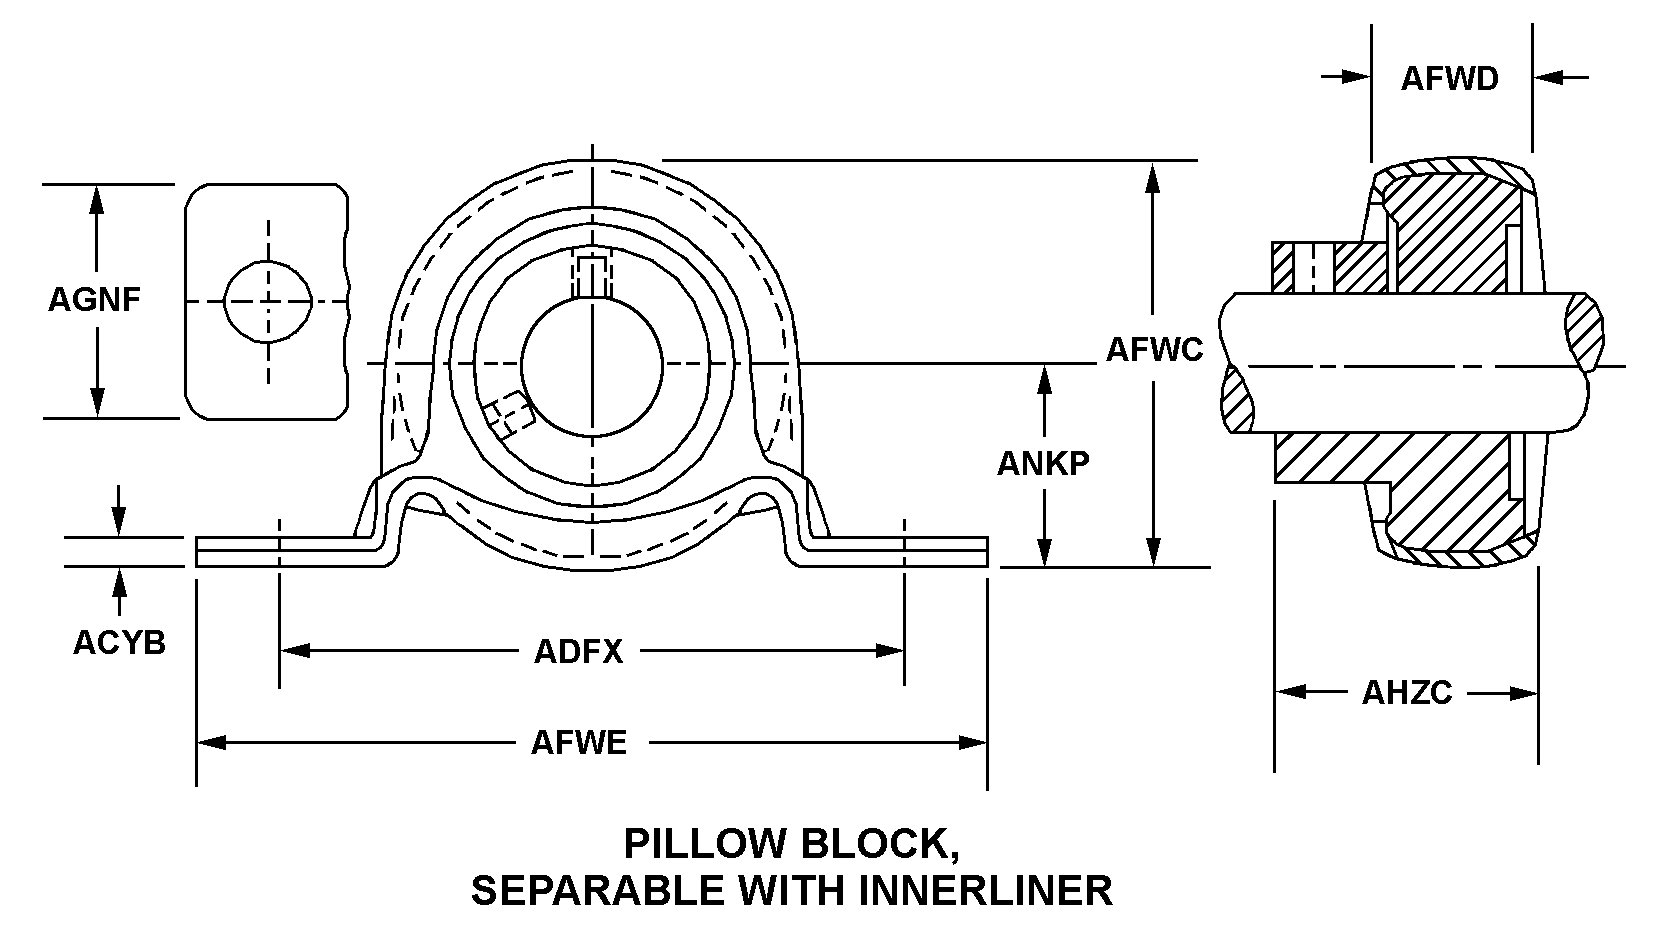 PILLOW BLOCK, SEPARABLE WITH INNERLINER style nsn 3130-01-620-3515